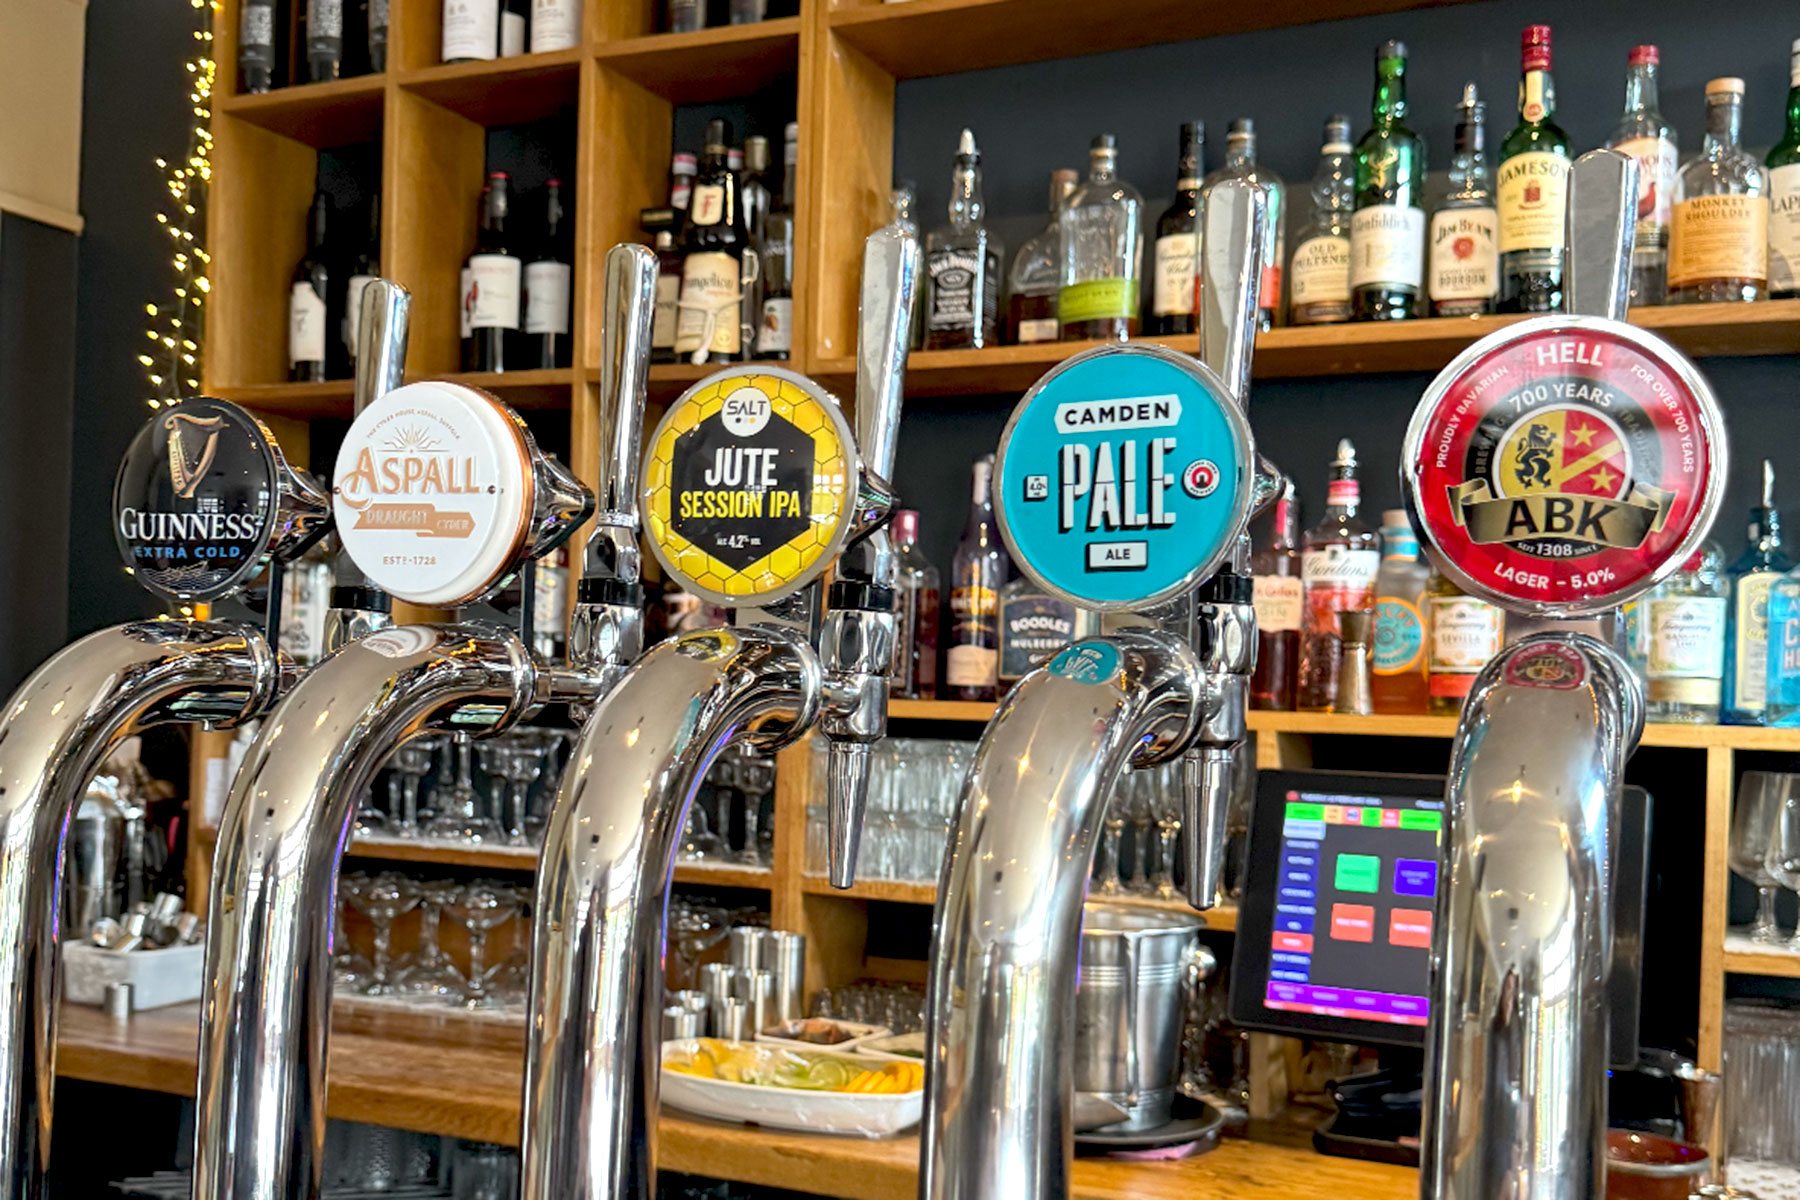 Mulberry Tree Restaurant - tap beers and ciders image